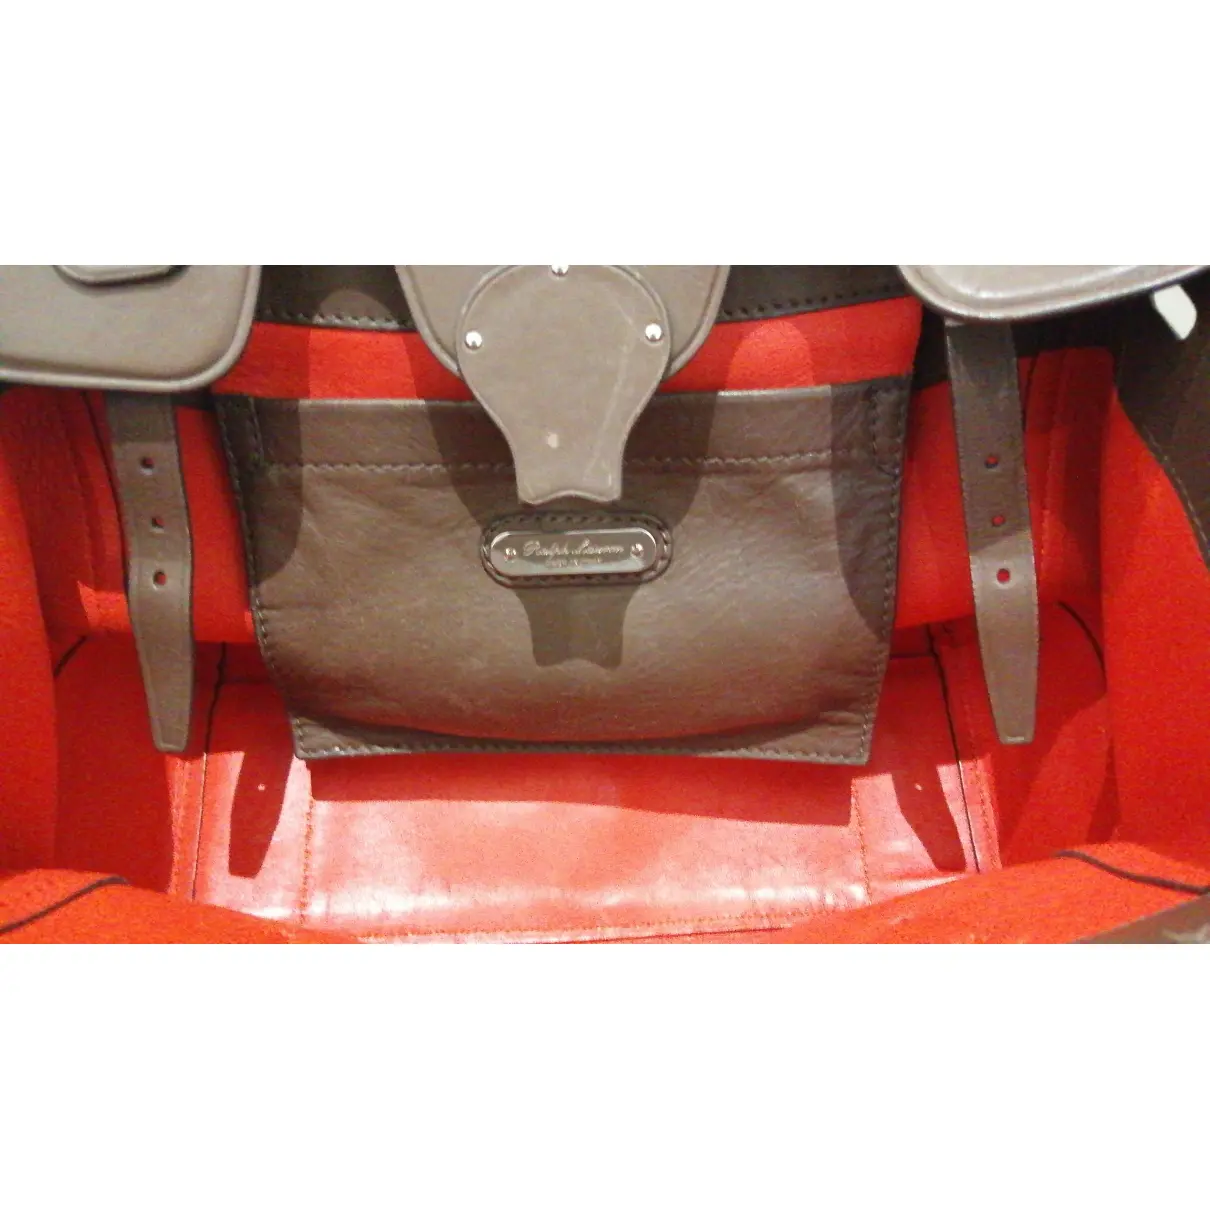 Ricky leather tote Ralph Lauren